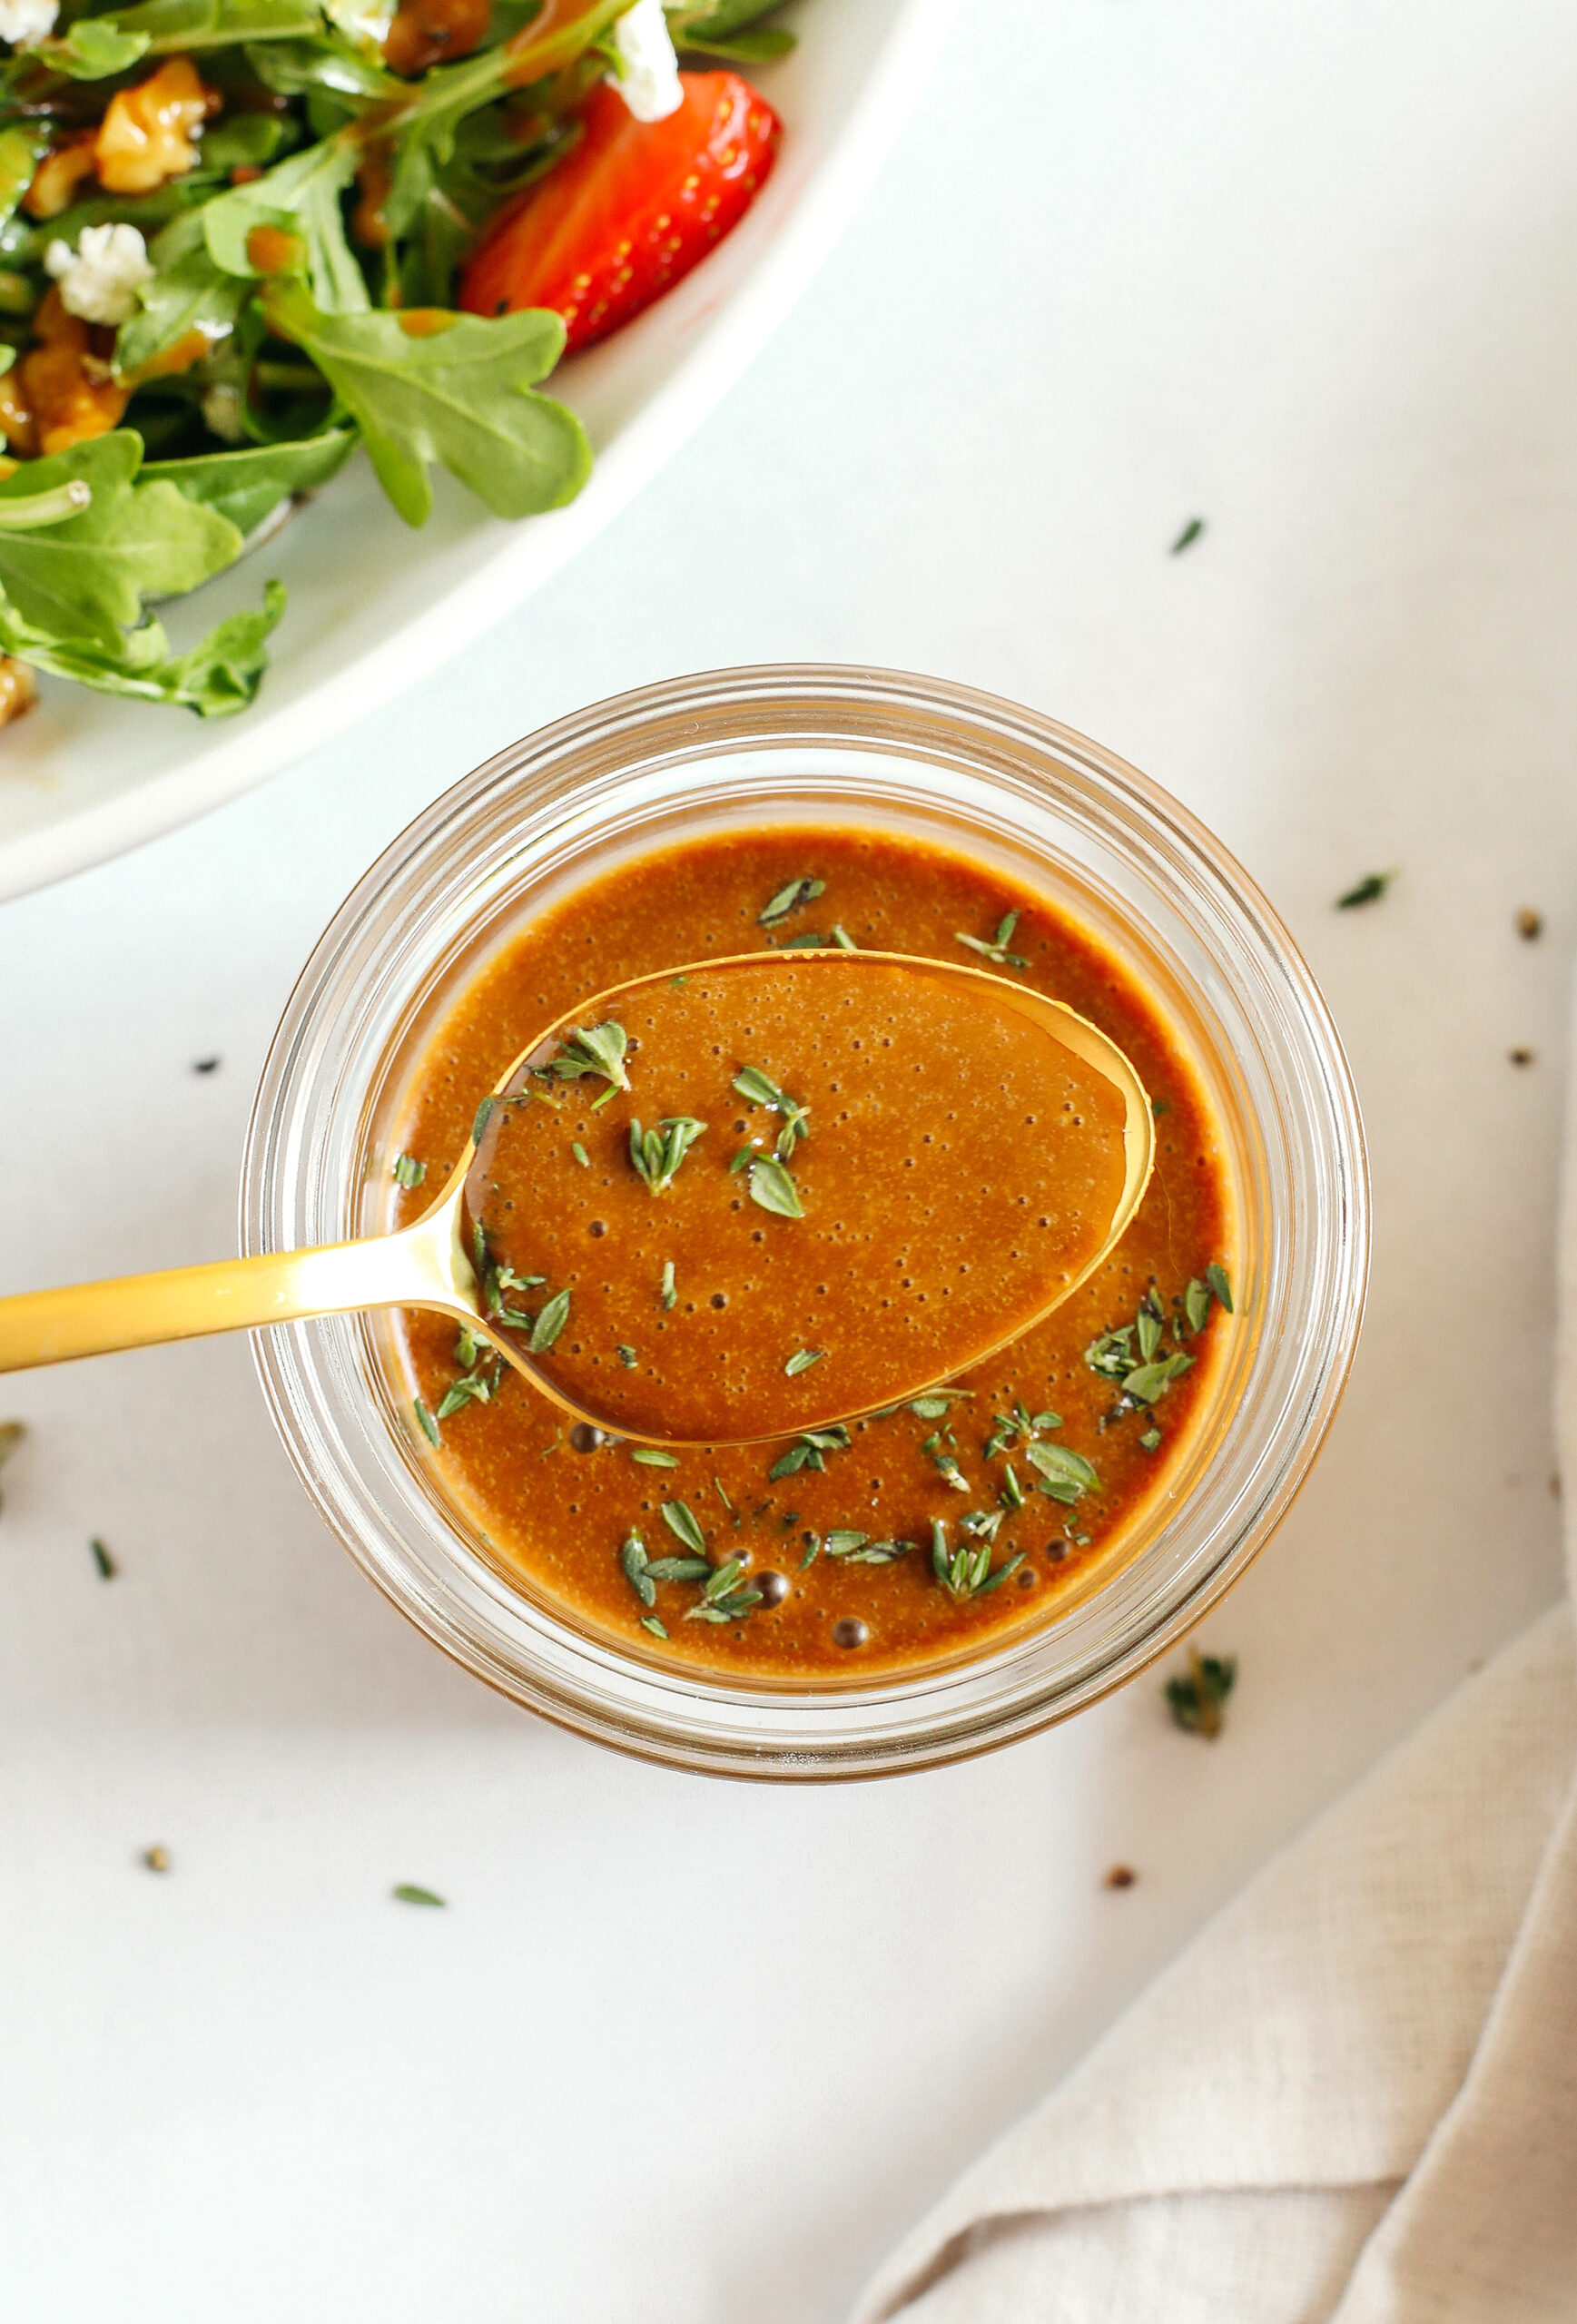 This Maple Balsamic Herb Dressing is fresh, tangy and made in just minutes with only 5 simple ingredients!  Perfect for salads, veggies, marinades, and more!